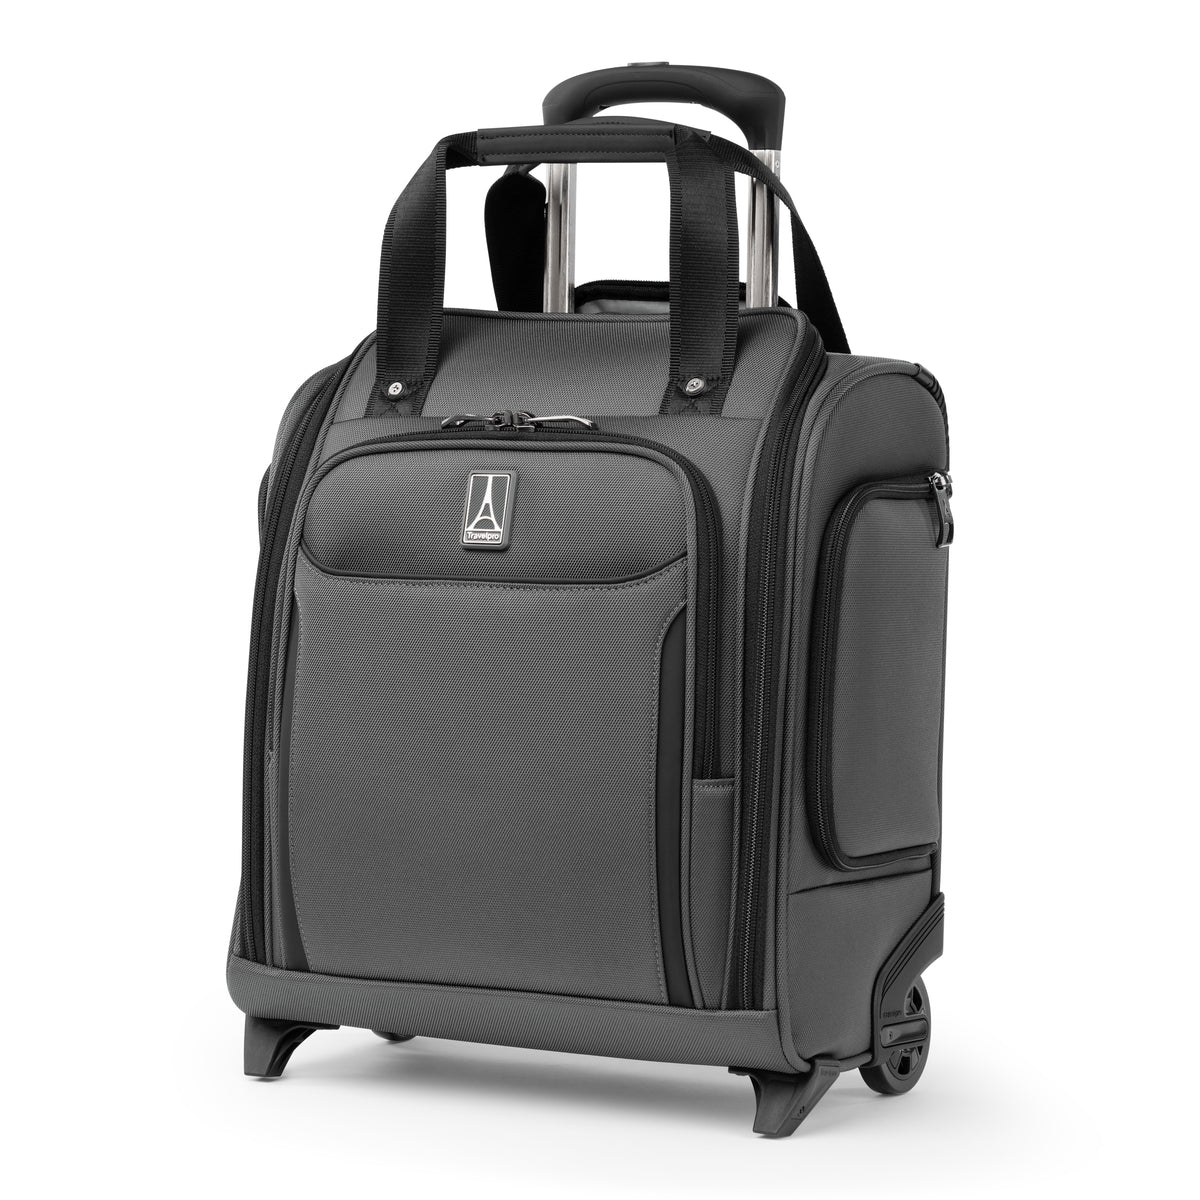 Travelpro Crew™ Classic UnderSeat Carry-on